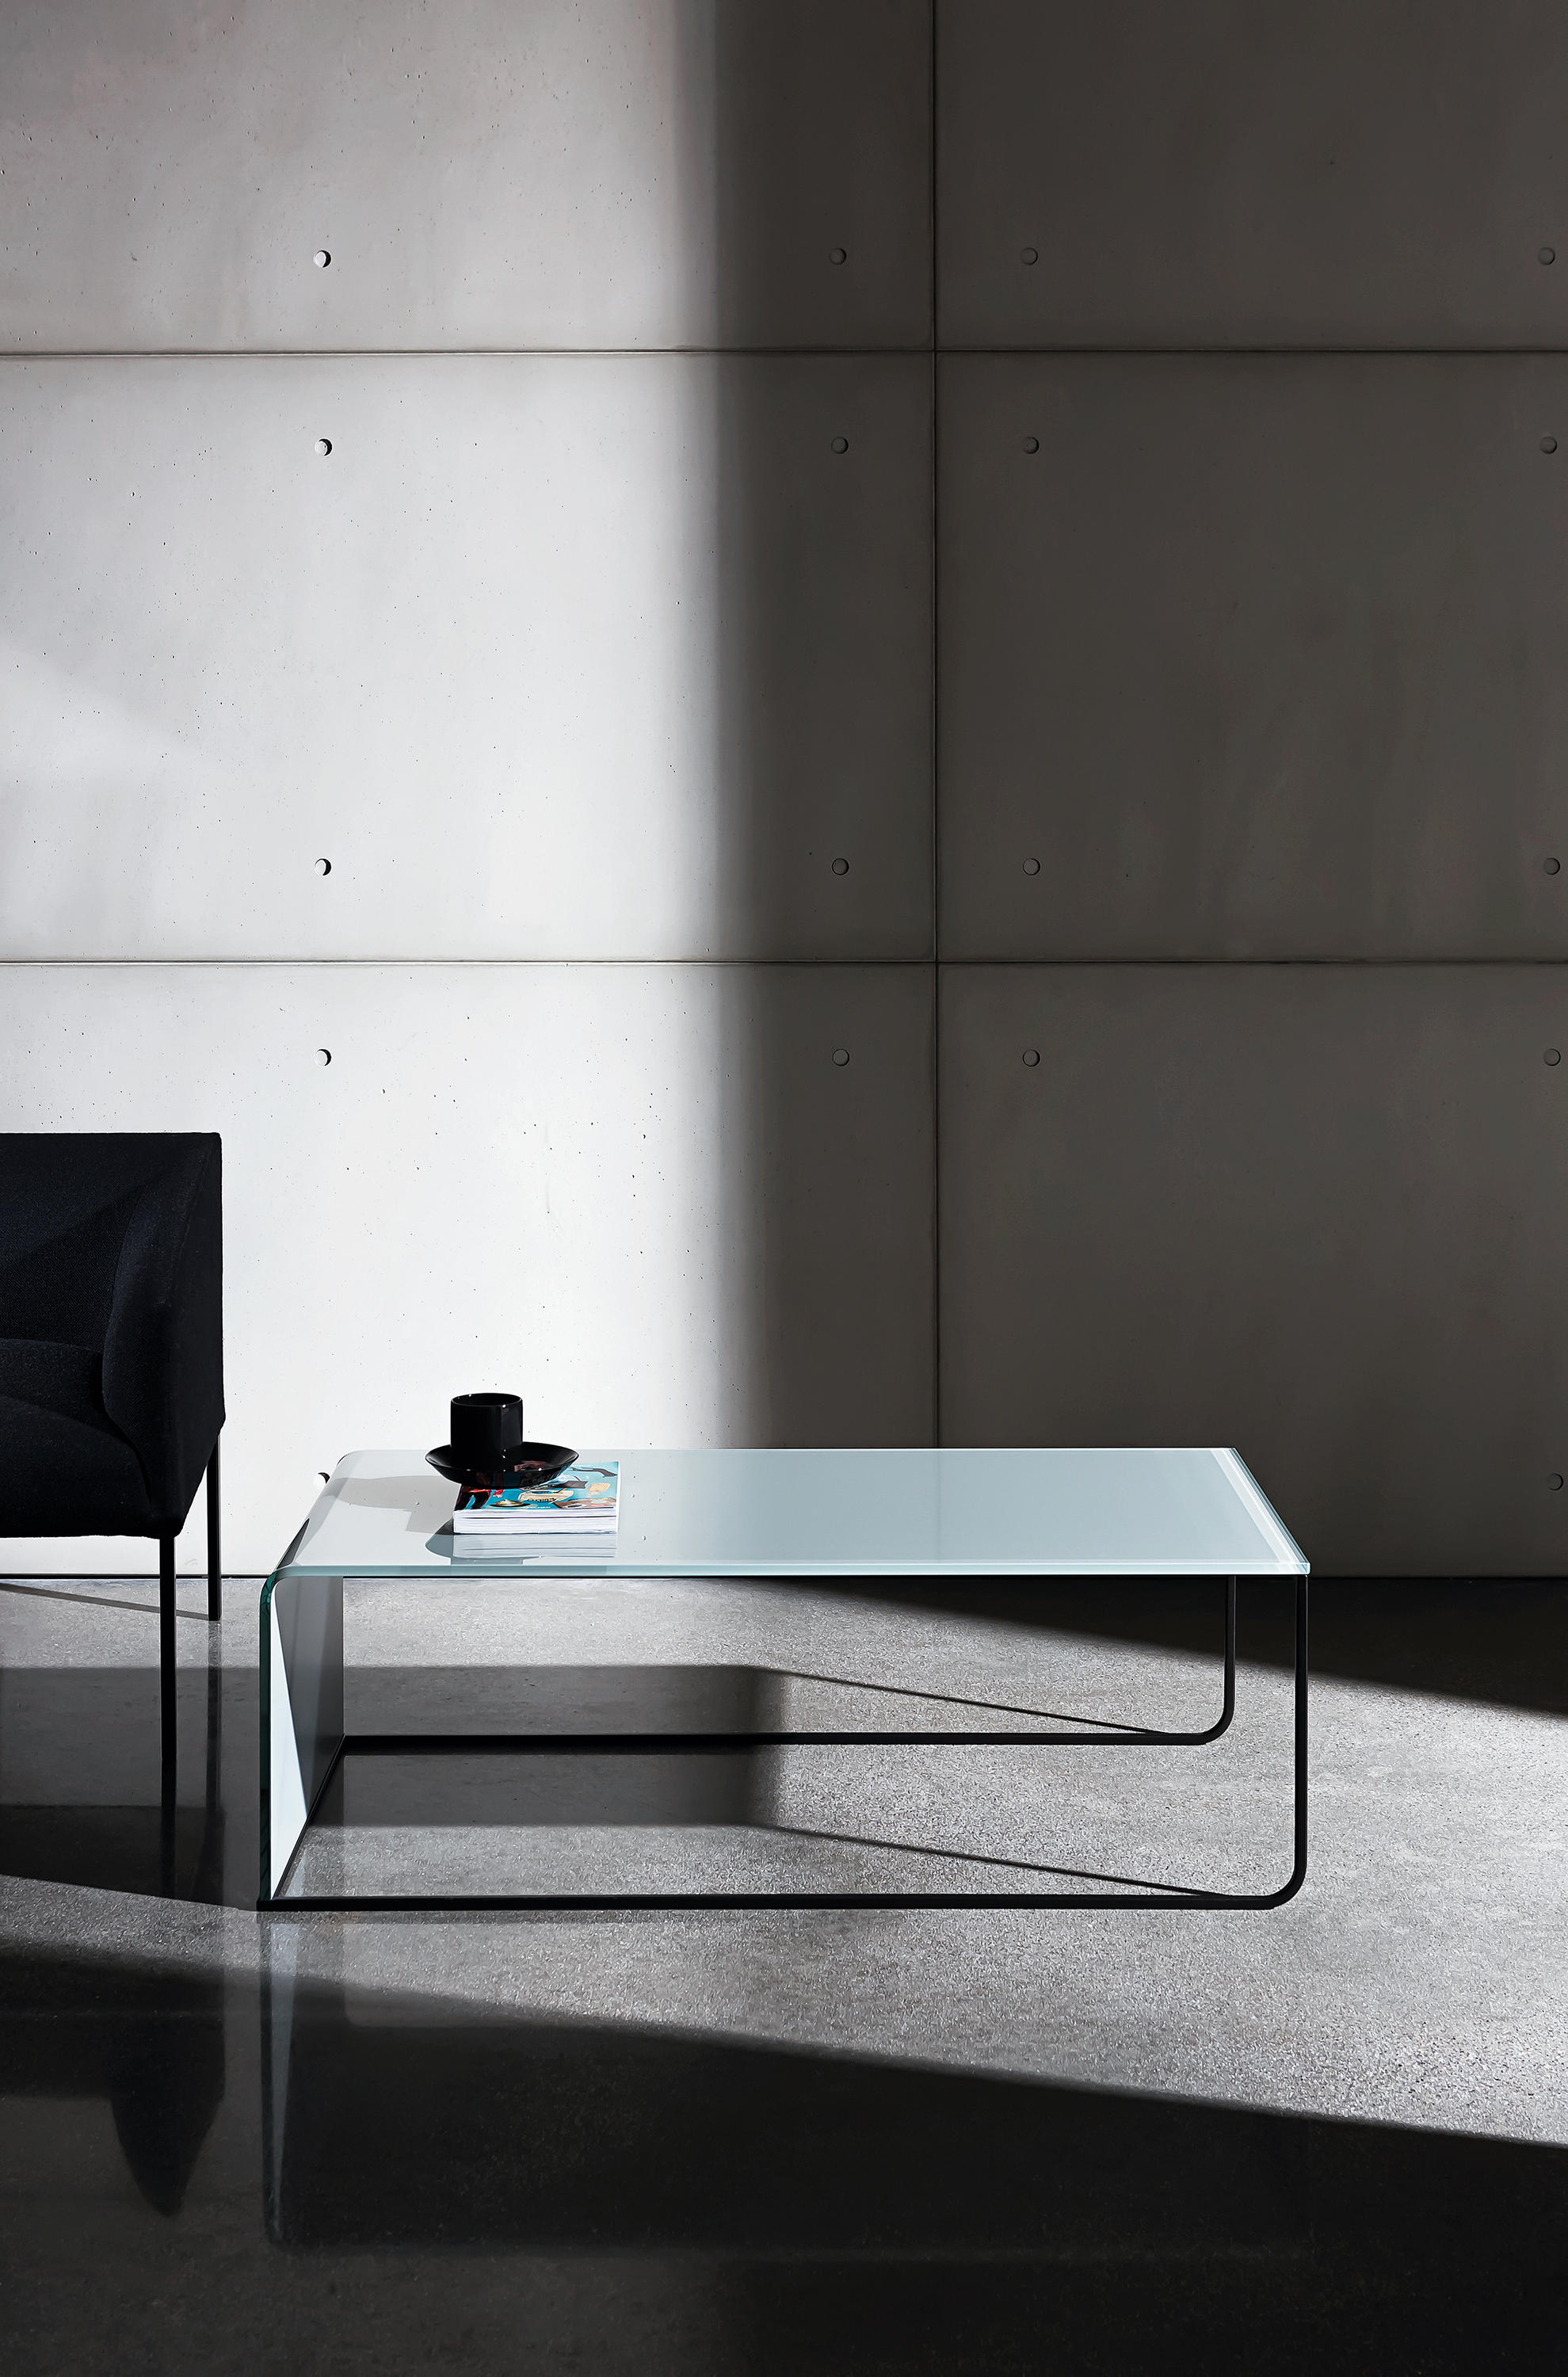 NIDO - Coffee tables from Sovet | Architonic